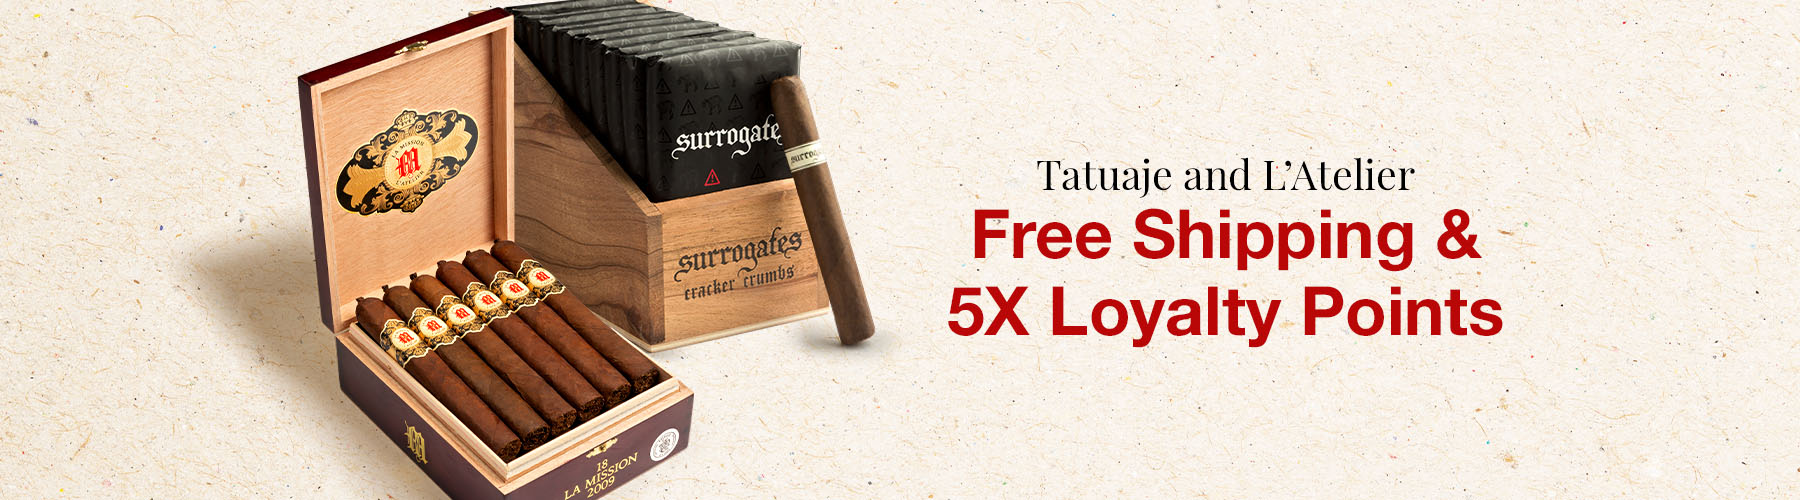 Tatuaje and L'Atelier  free shipping & 5X Loyalty Points!